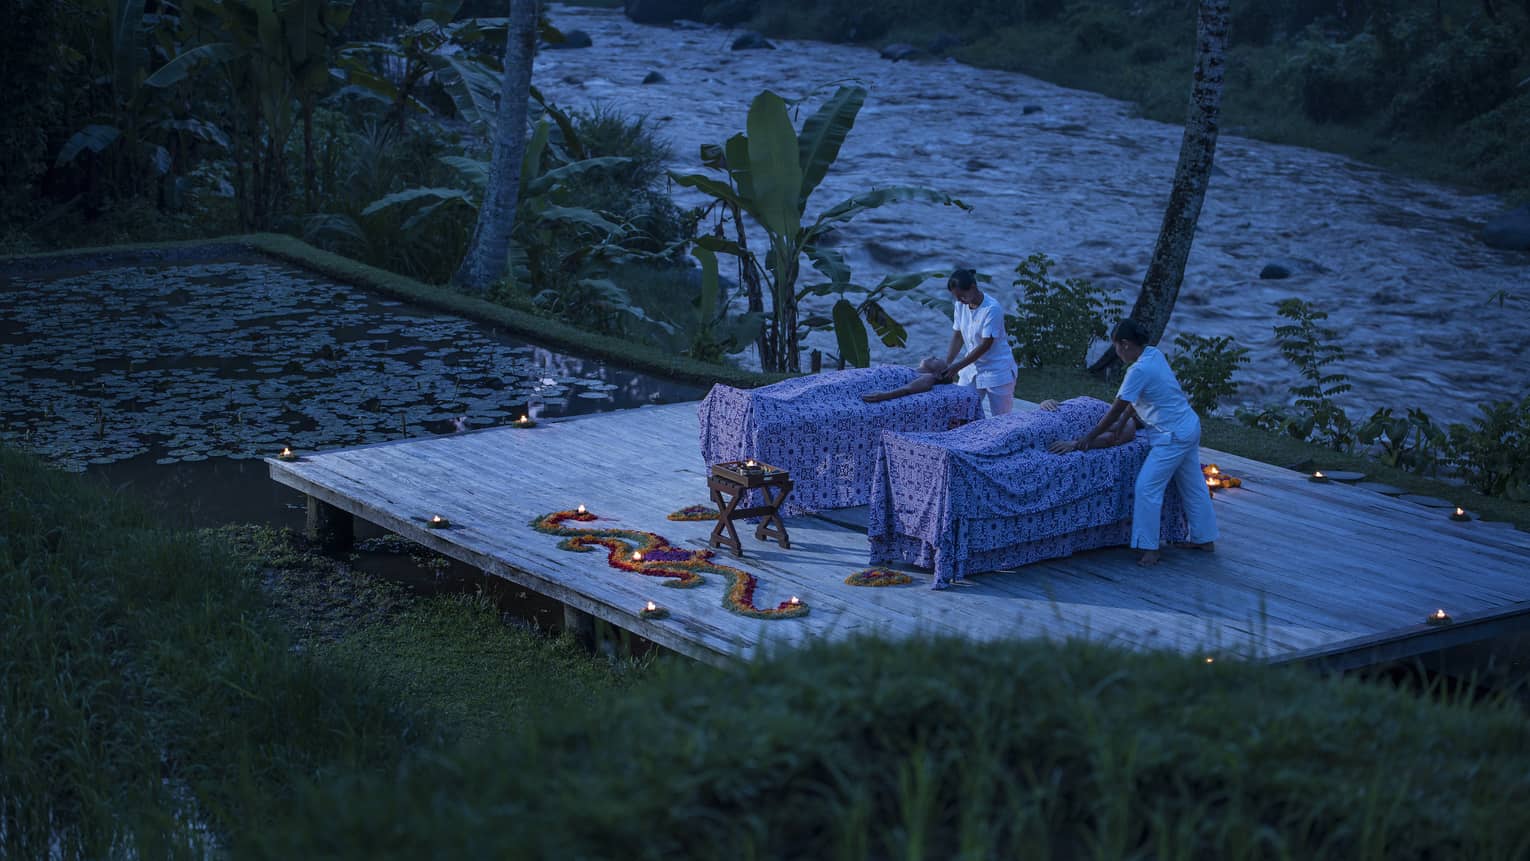 Two guests receive candle-lit massages on a dock at night 